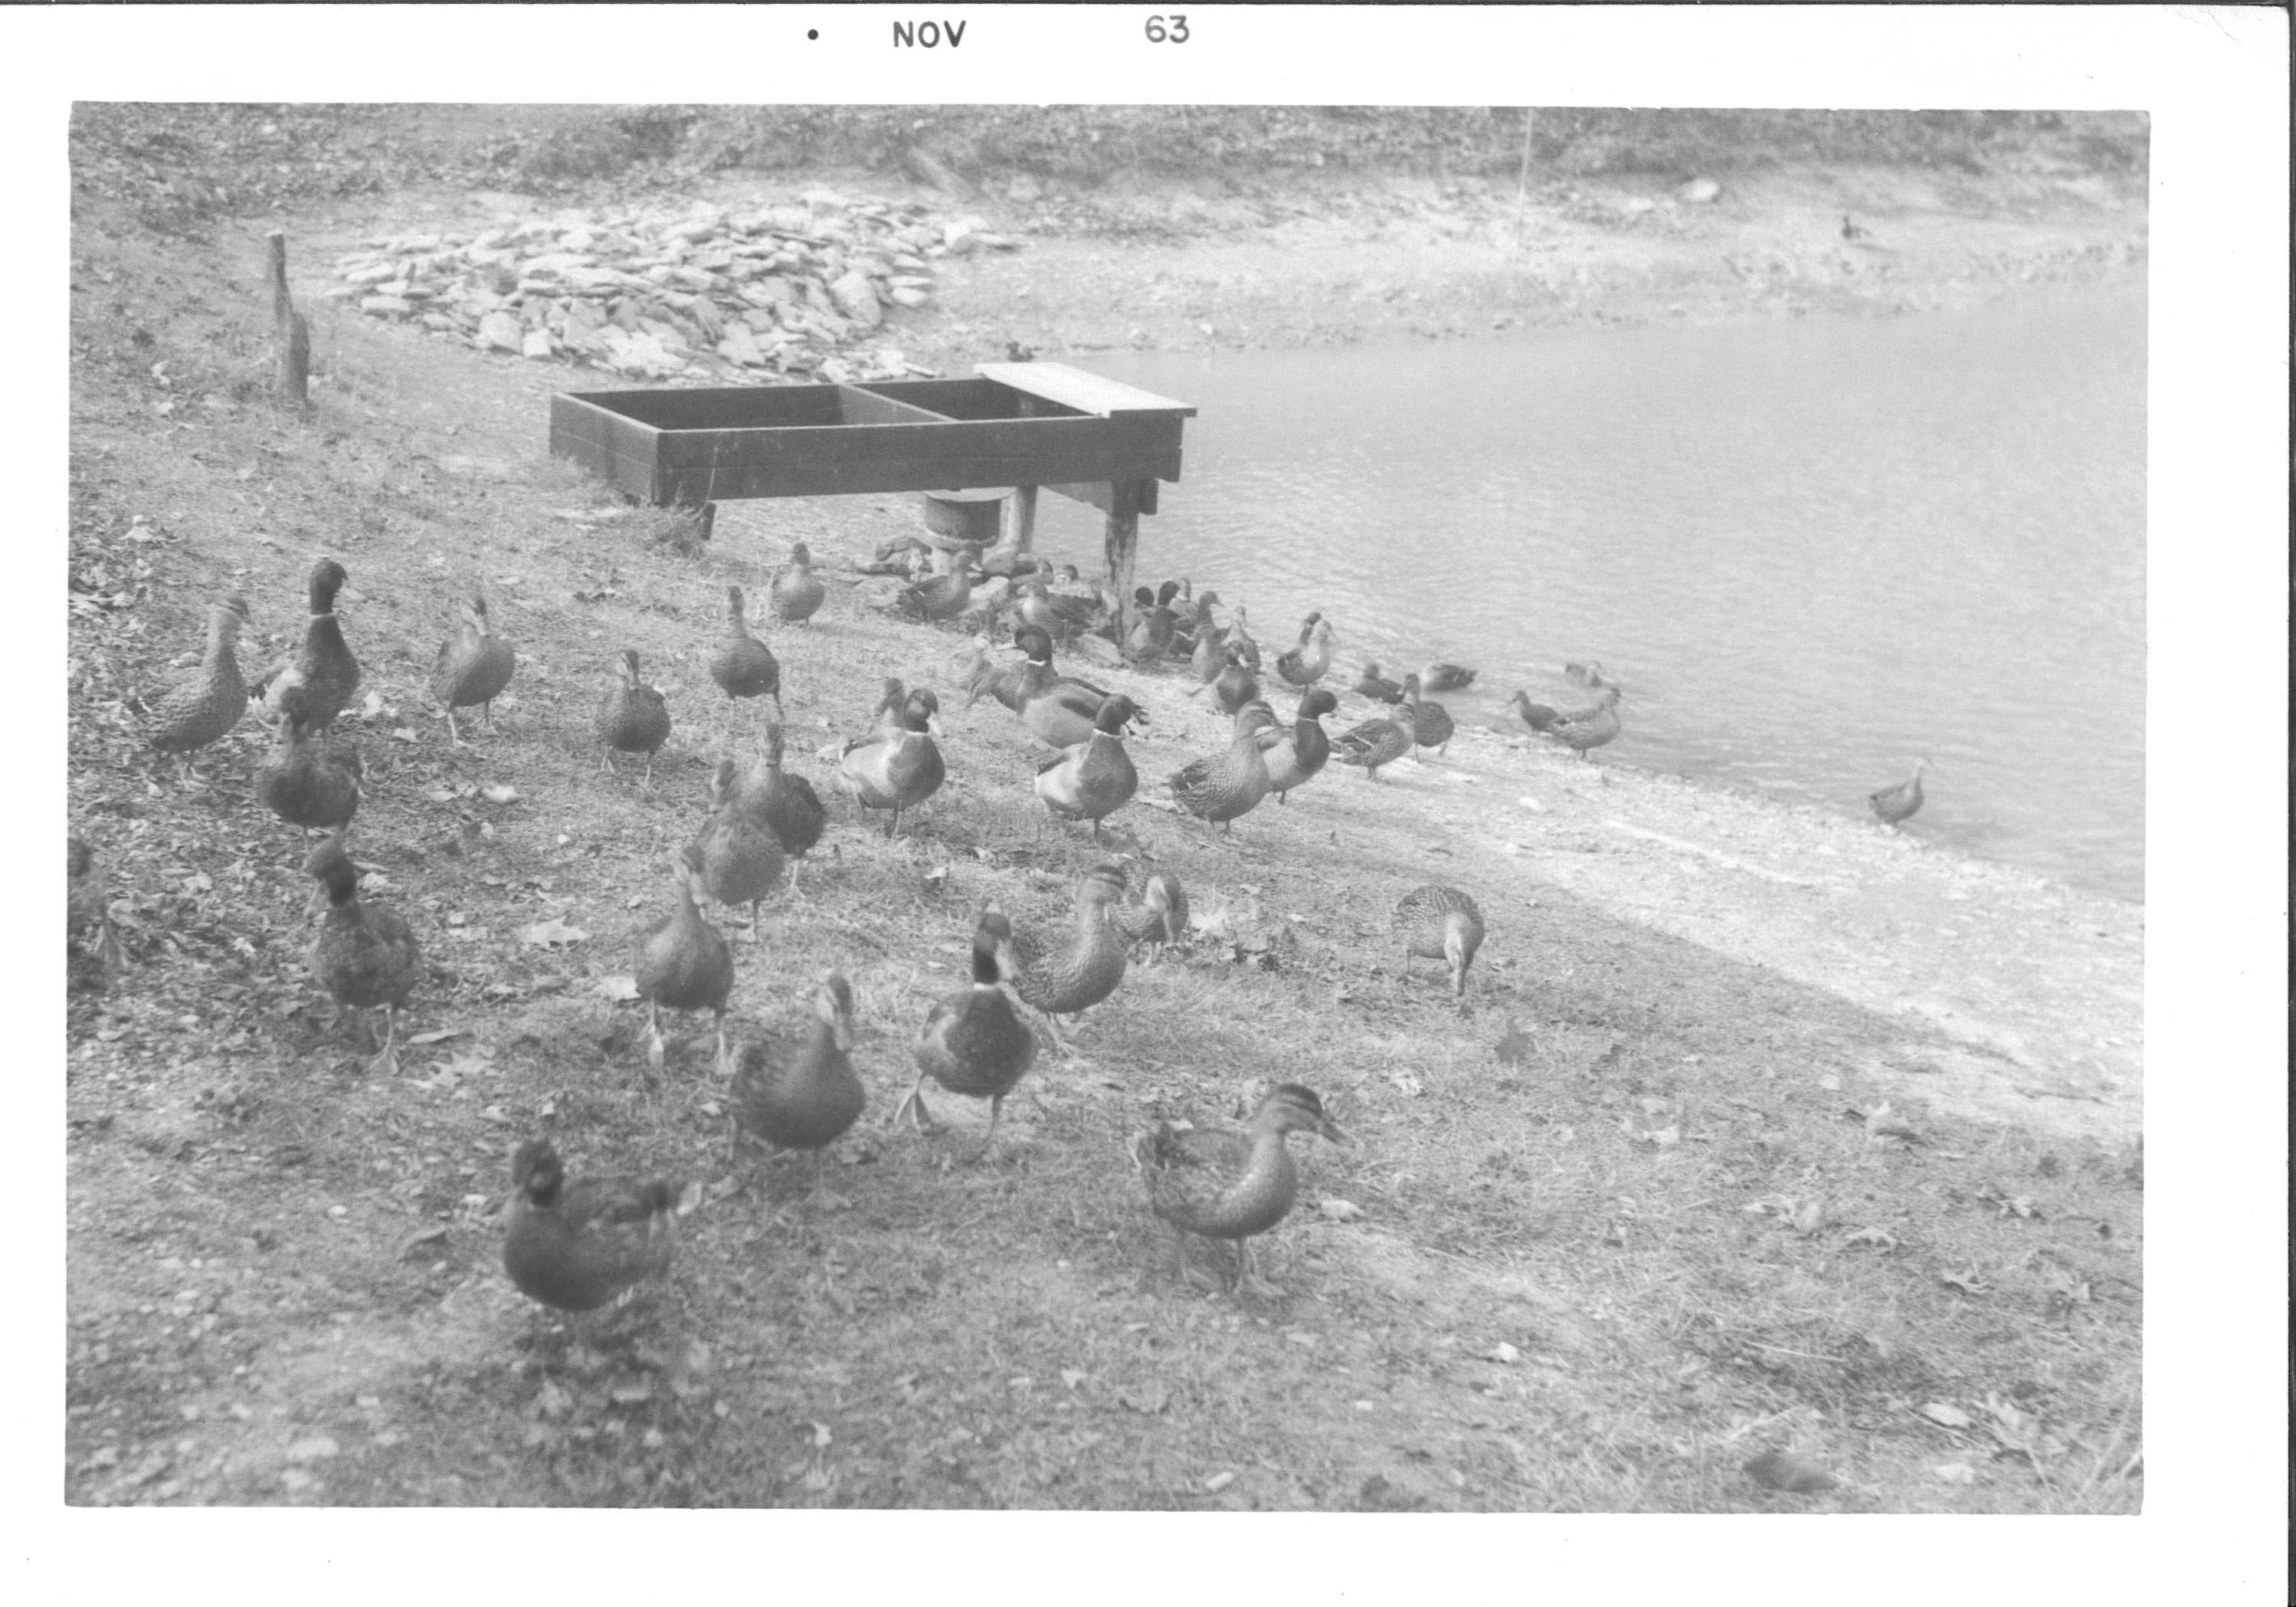 The efforts of the Miller brothers didn’t stop with plant life. Over the years, the grounds were stocked with quail, ducks, rainbow trout, bass, perch, and flathead minnows were all released in and around the Meadowcroft pond. Albert Miller Papers and Photographs, MSS 1095, Meadowcroft Rockshelter and Historic Village.